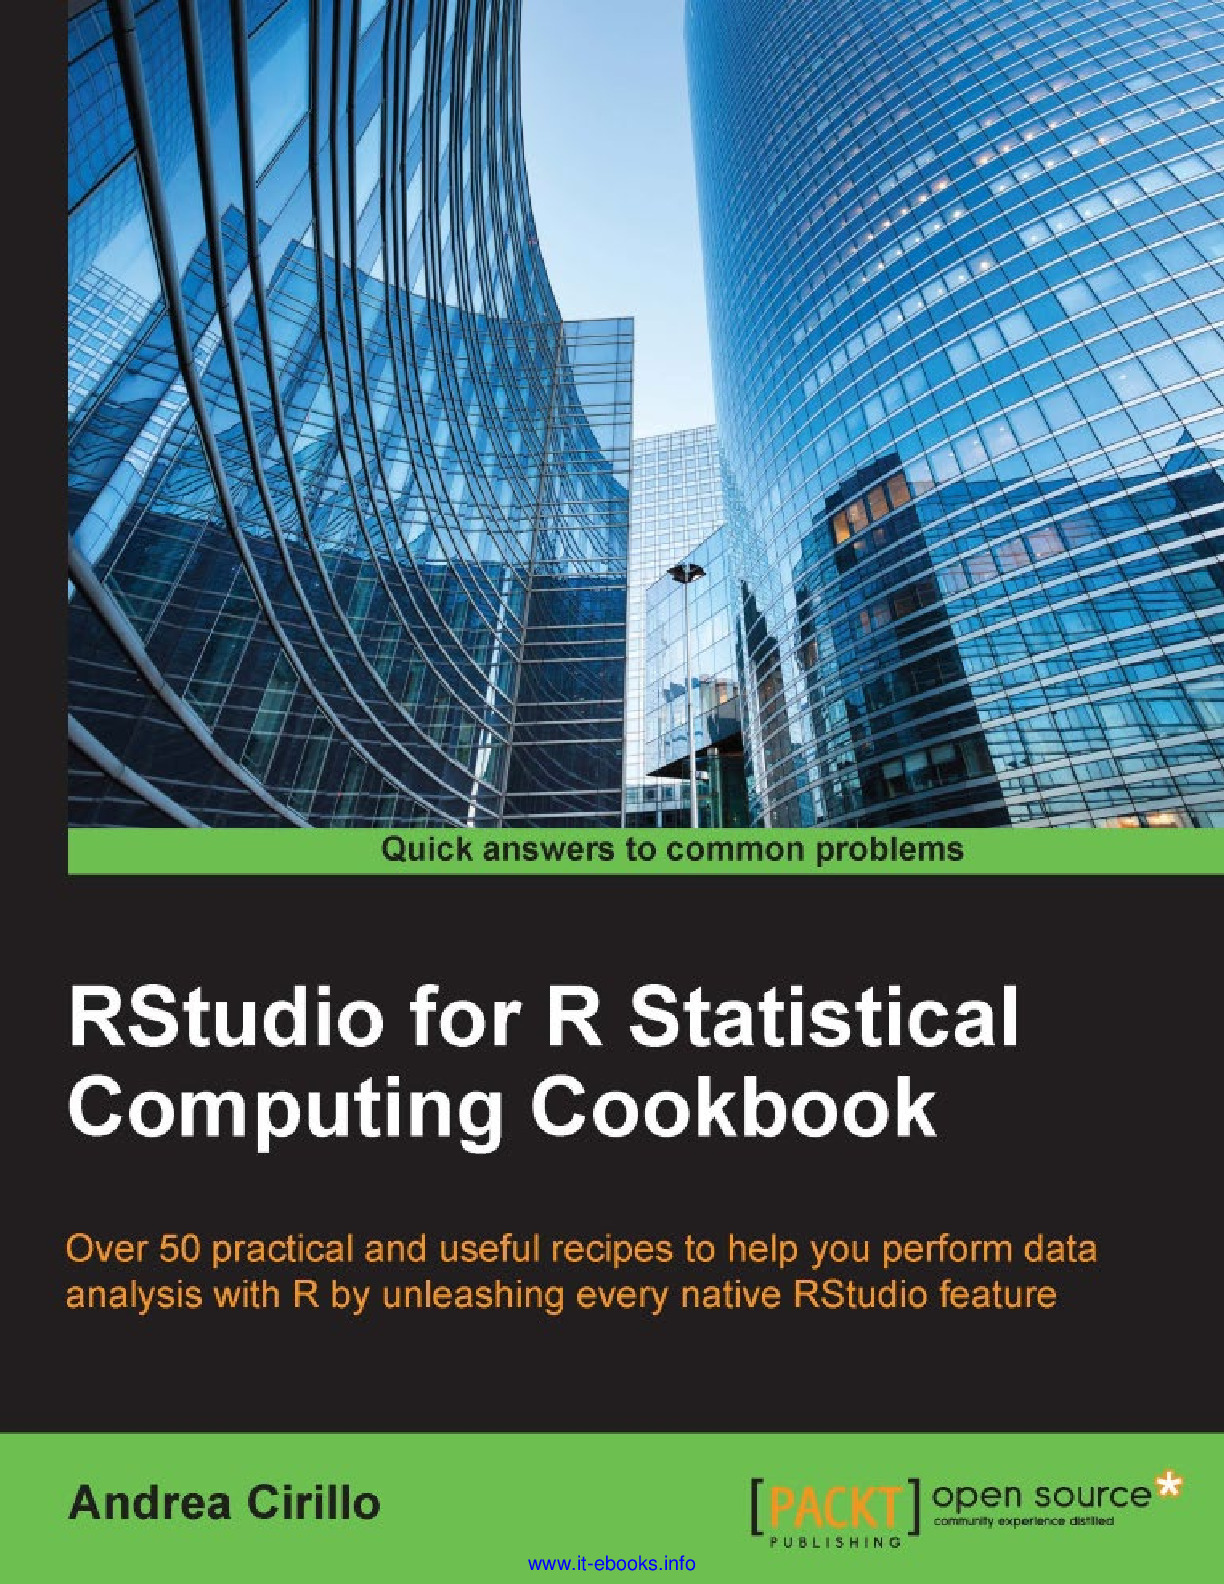 RStudio for R Statistical Computing Cookbook_ Over 50 practical and useful recipes to help you perform data analysis with R by unleashing every native RStudio feature